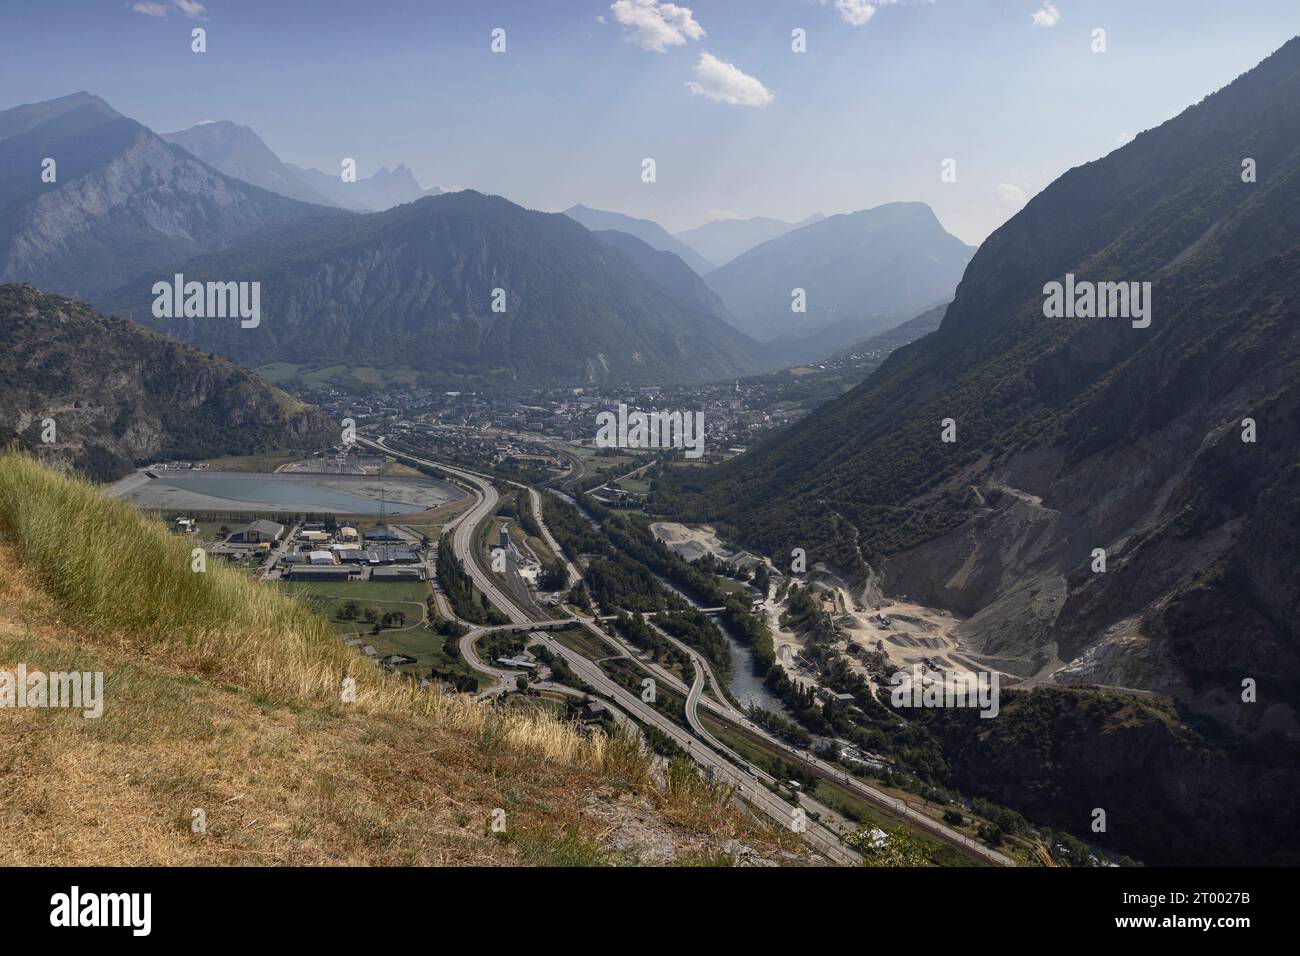 Paroramic view from Le Chatel towards the city of Saint-Jean-de-Maurienne and the Maurienne Valley in the Rhone-Alps region of France. Summertime land Stock Photo